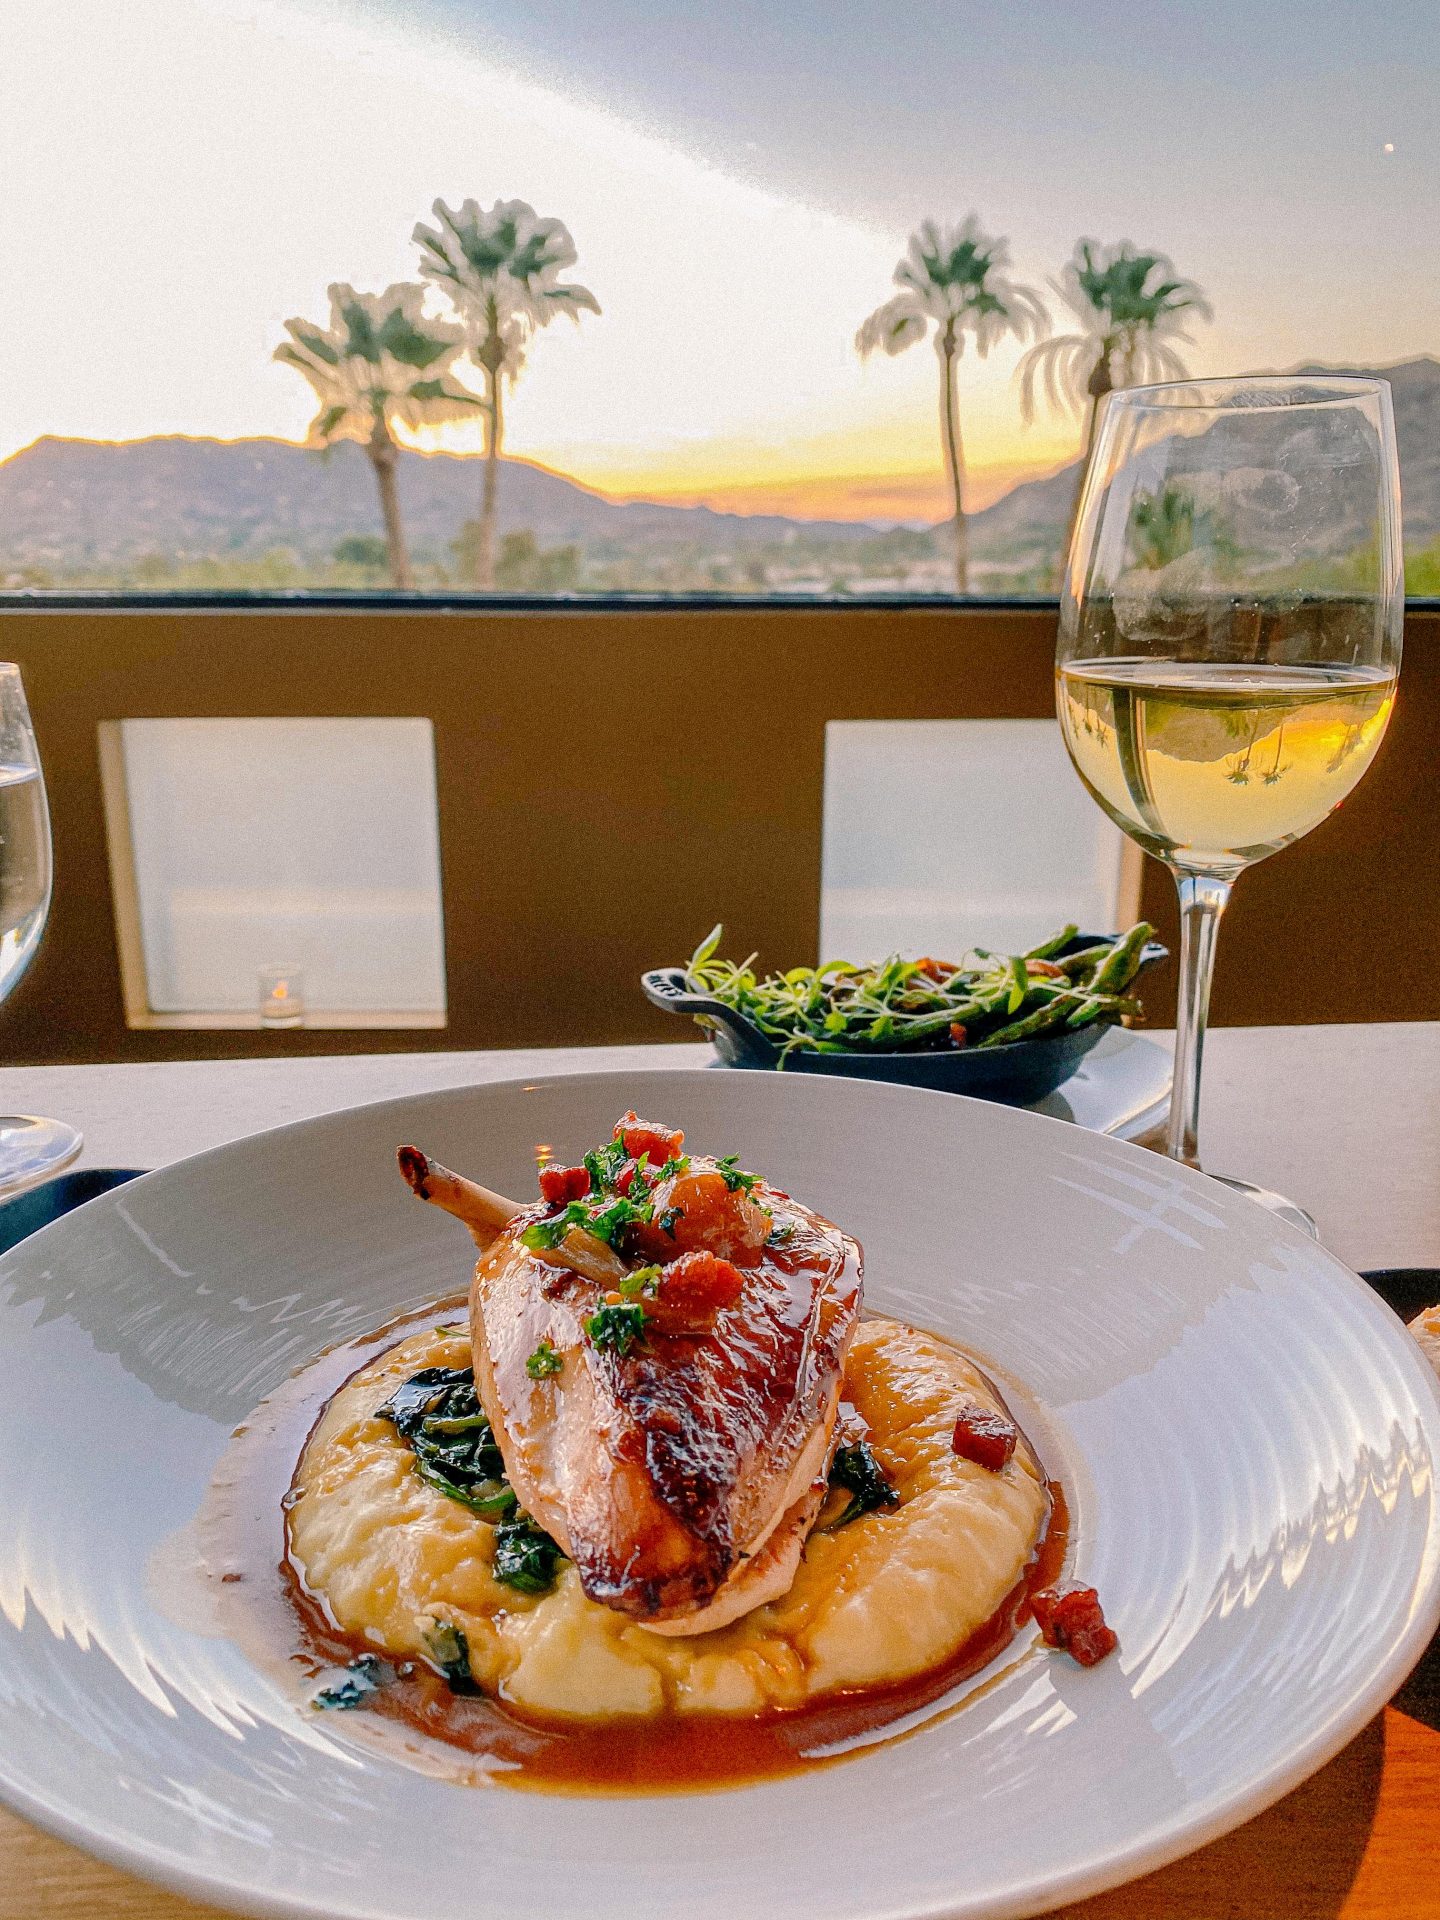 elements, celebrity chef, sanctuary, asian, lobster macaroni, the best dinner in scottsdale, sunset, margarita, food, honeymoon, the best trip, scottsdale travel guide, what to do in scottsdale, ultimate guide, blog